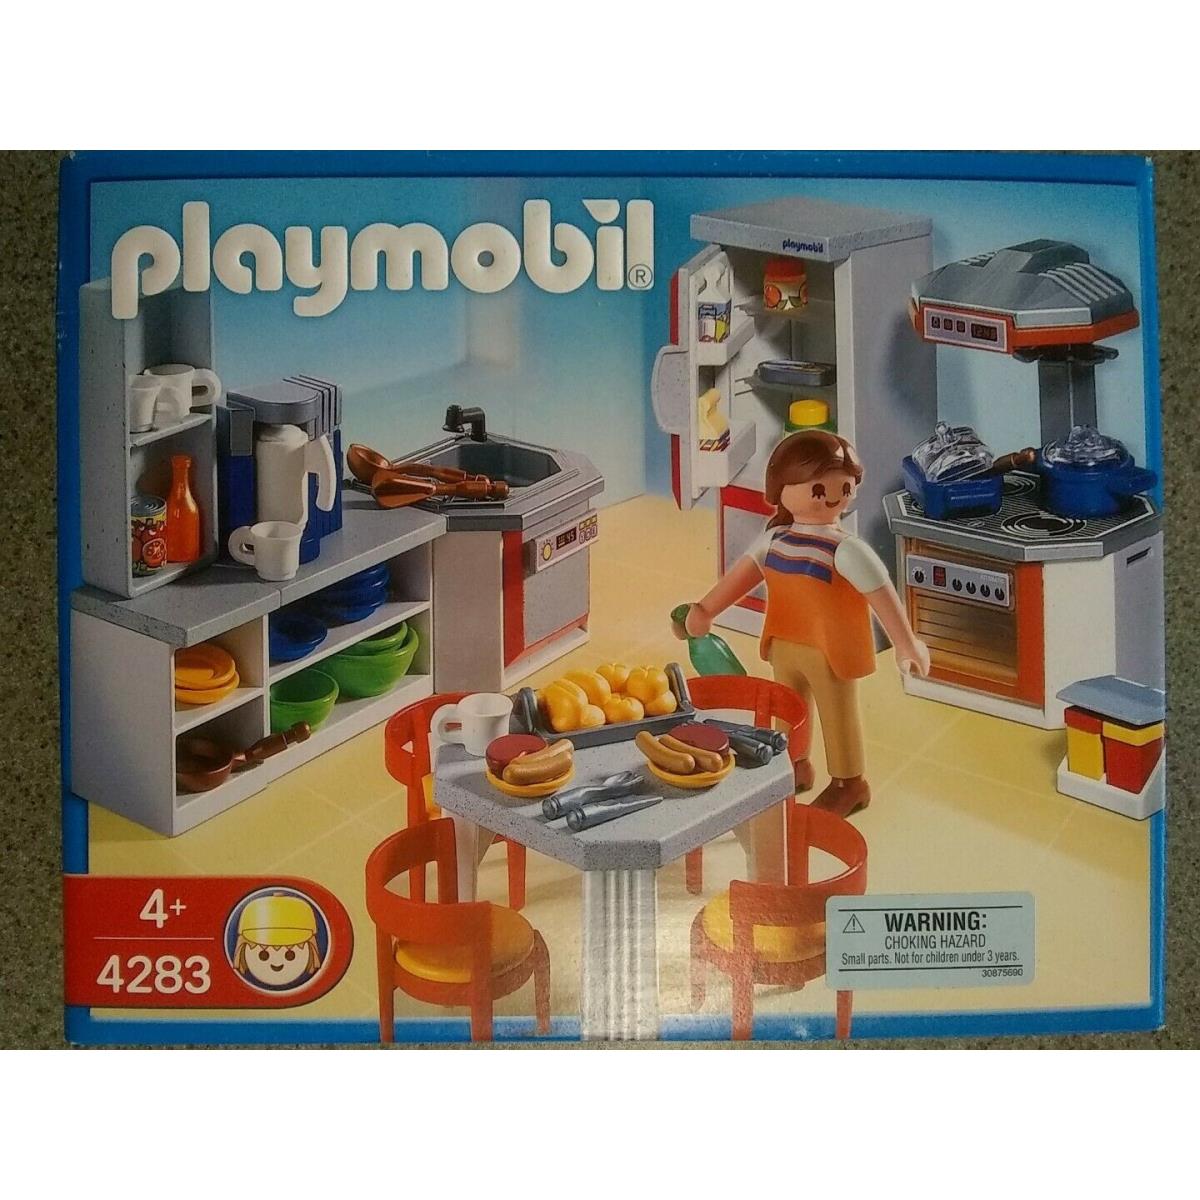 Playmobil 4283 Kitchen with Dinnette Set Food Dishes Appliances Table